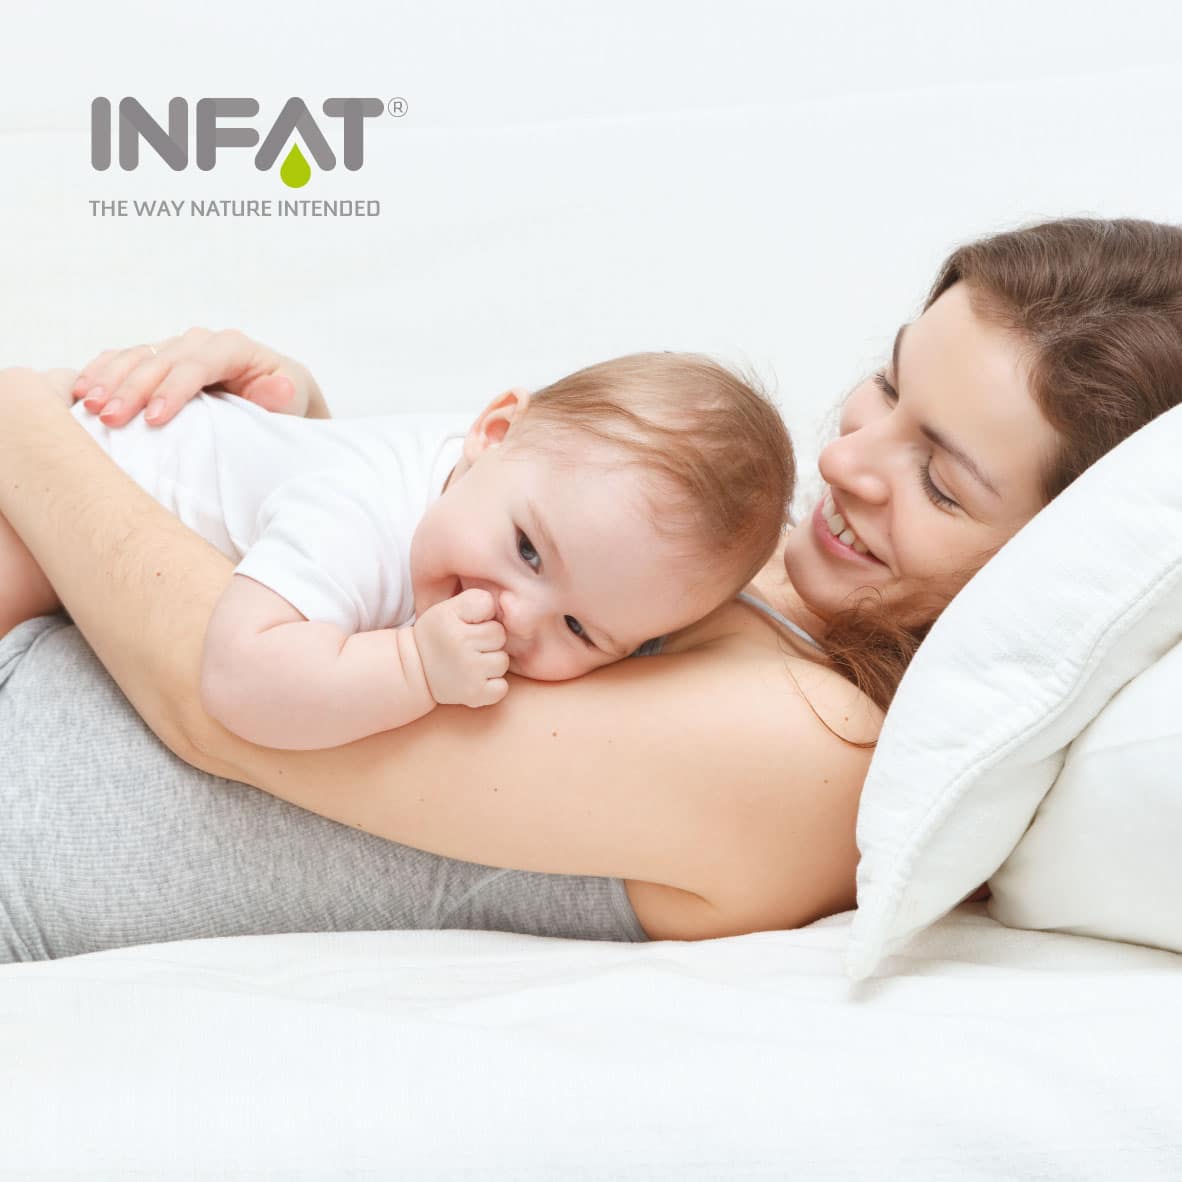 INFAT® is infant nutrition ingredient of the year